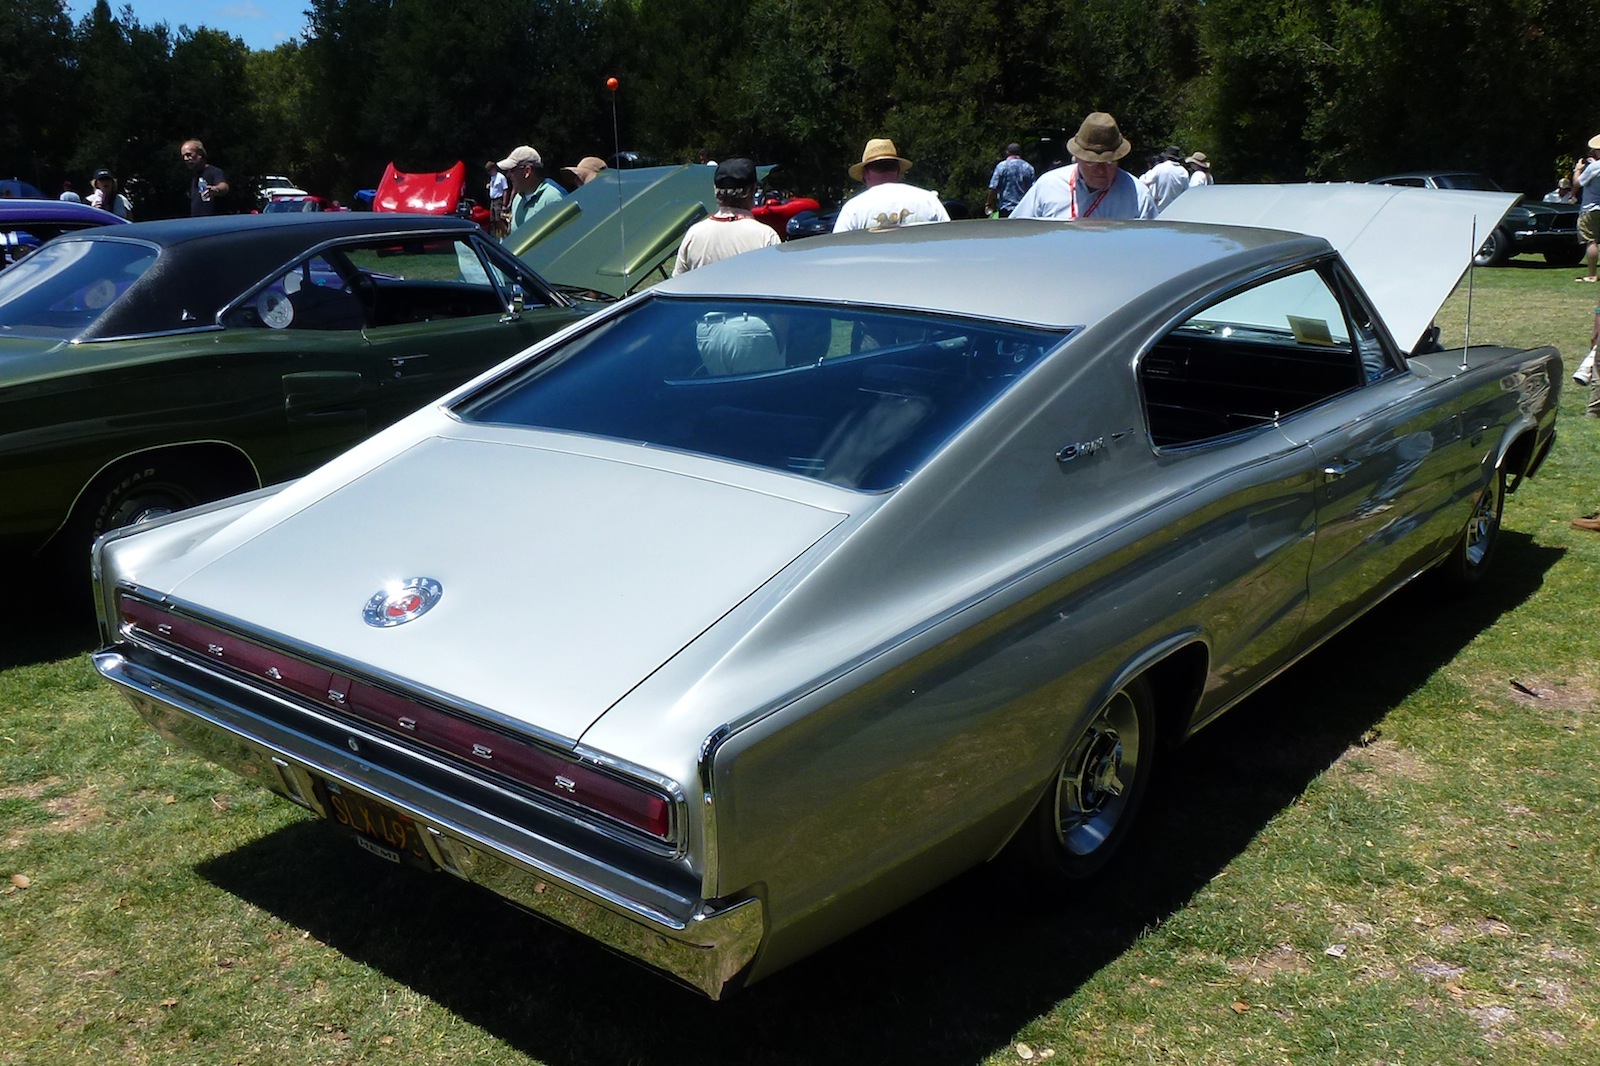 The Original Dodge Charger – What A Fastback!